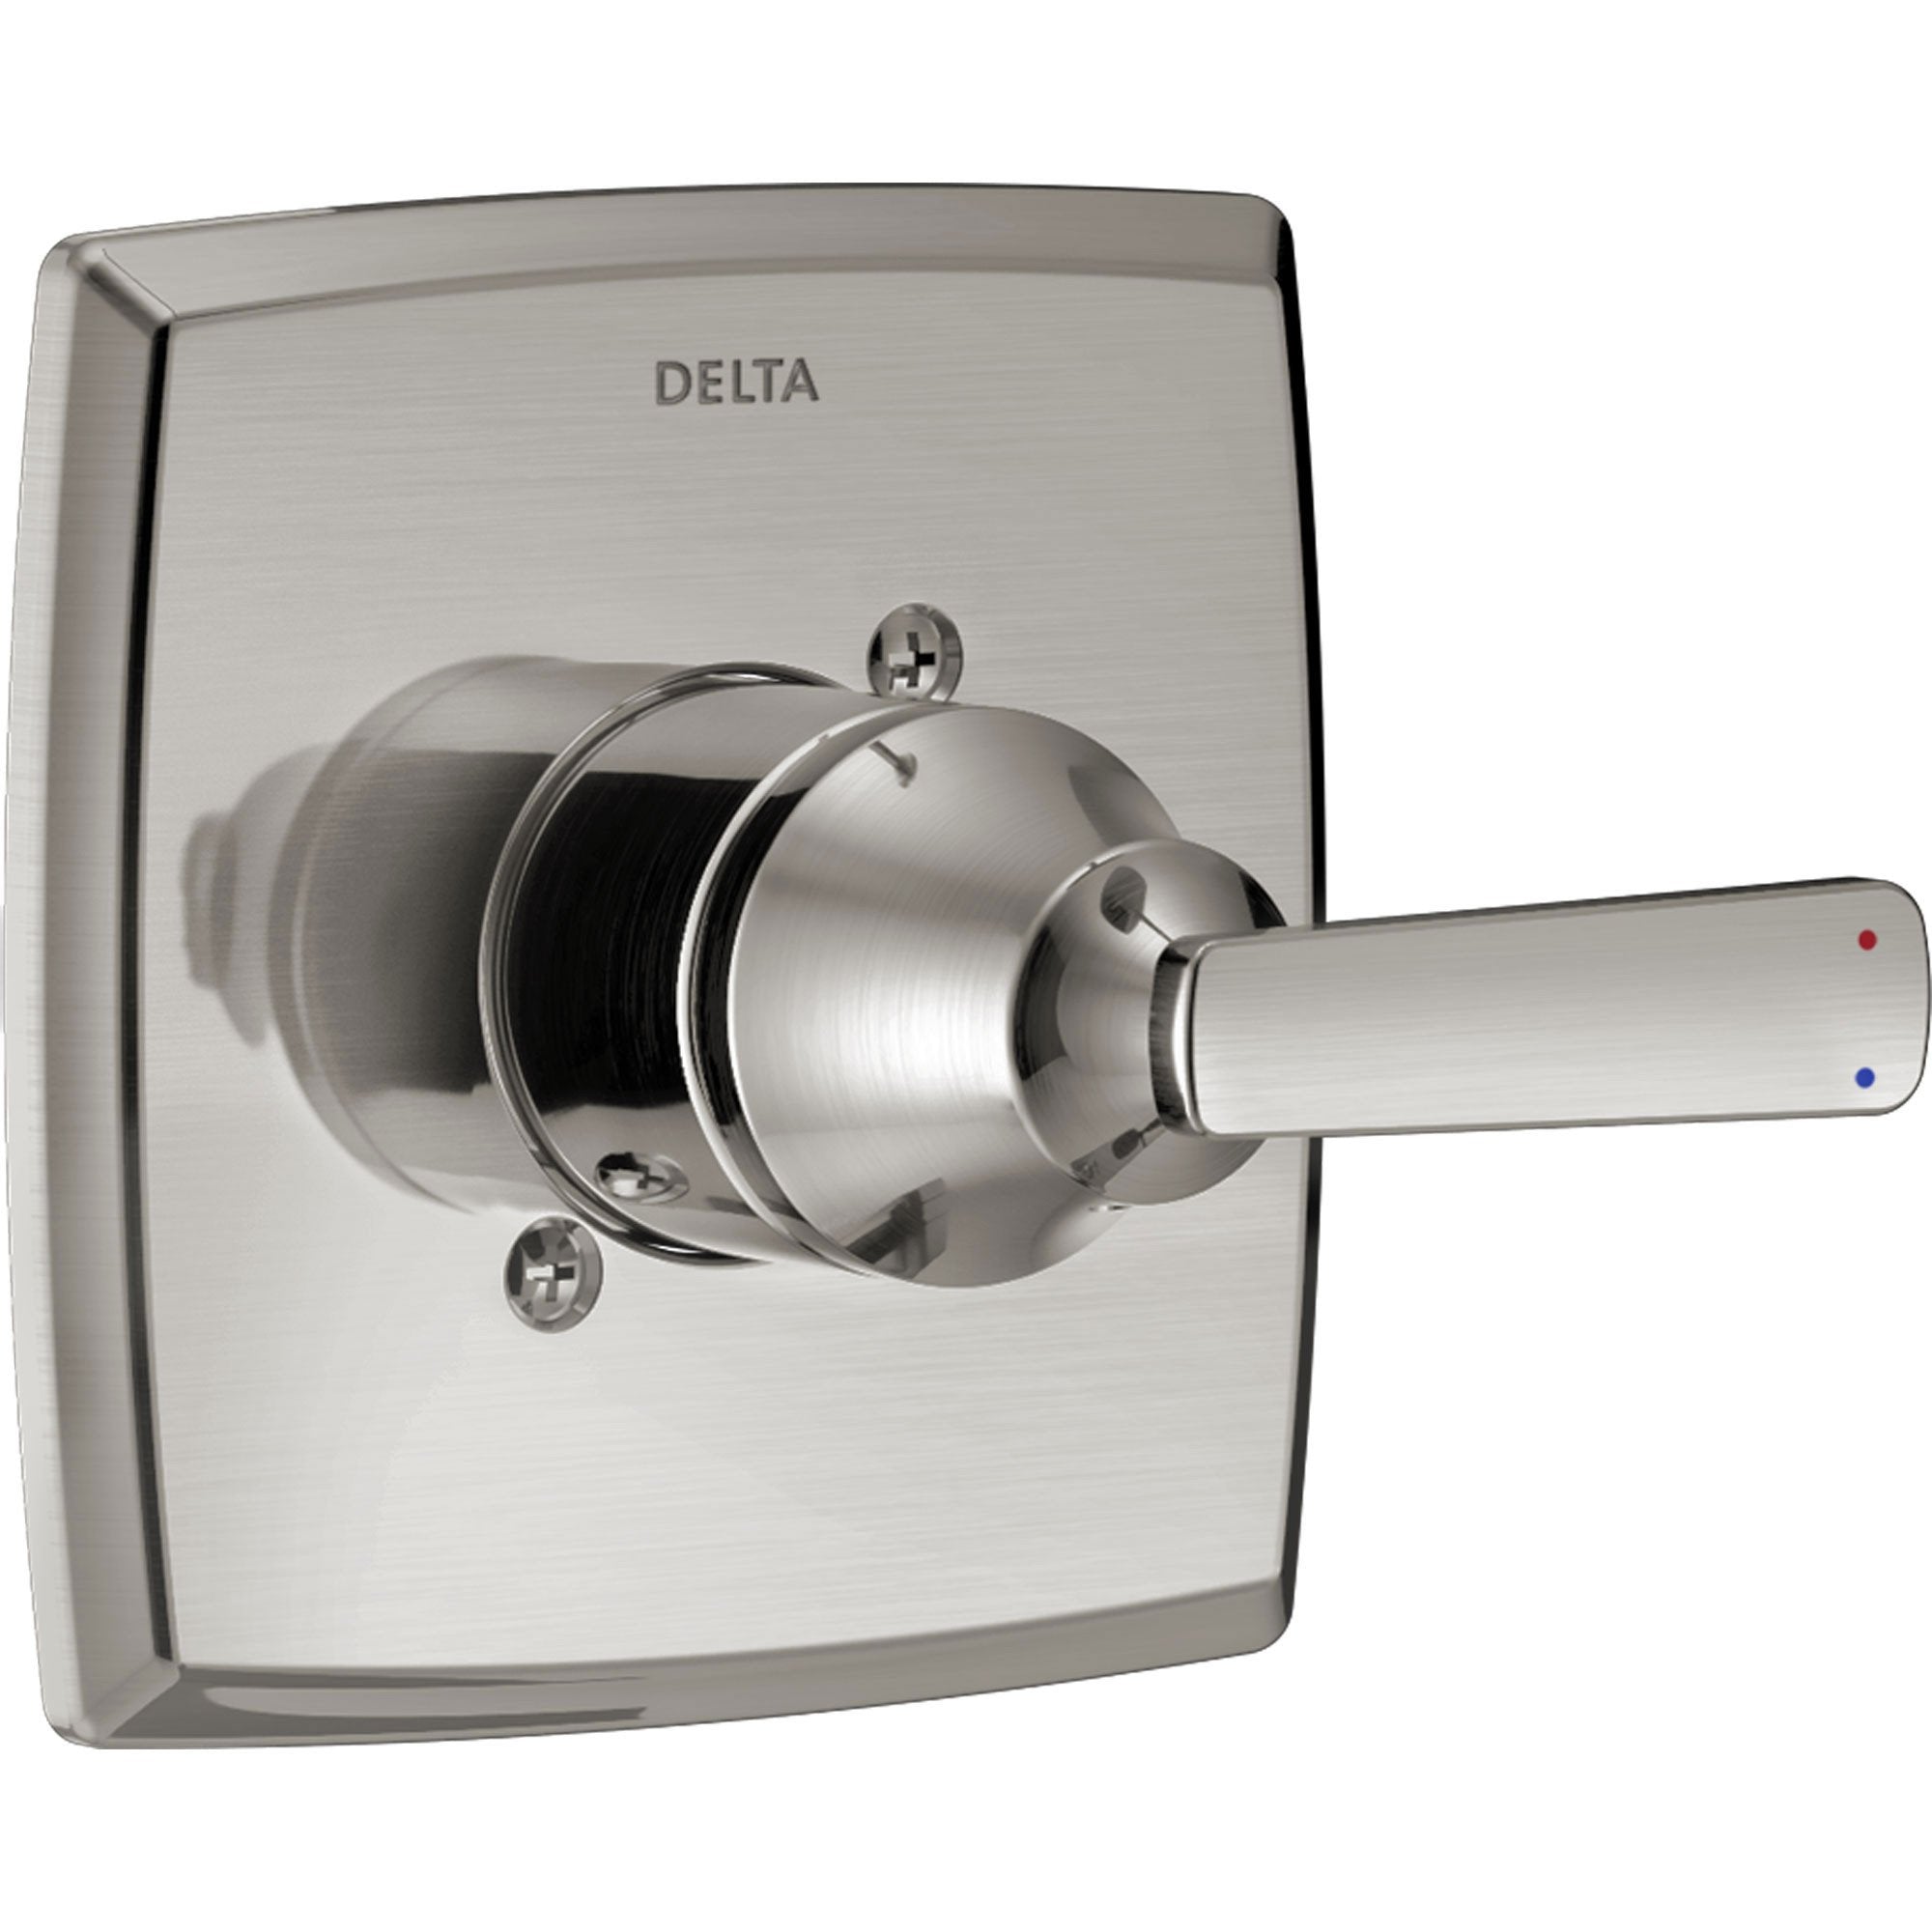 Delta Ashlyn 14 Series Modern Stainless Steel Finish Single Handle Pressure Balanced Shower Faucet Control INCLUDES Rough-in Valve D1256V